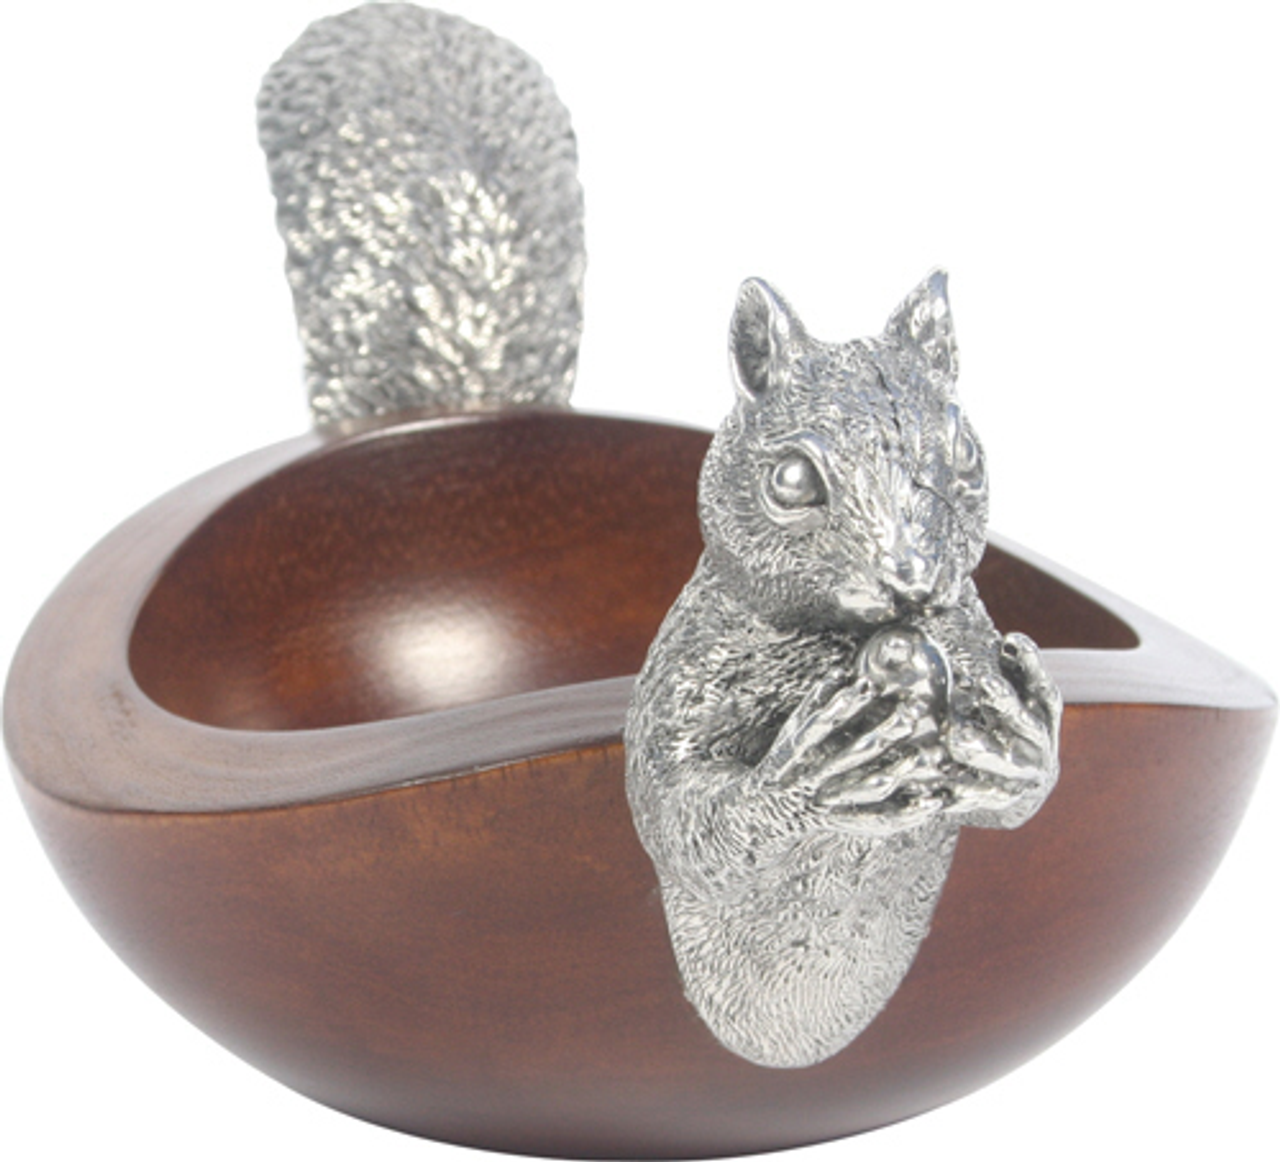 Squirrel Nut Bowl - Large Size